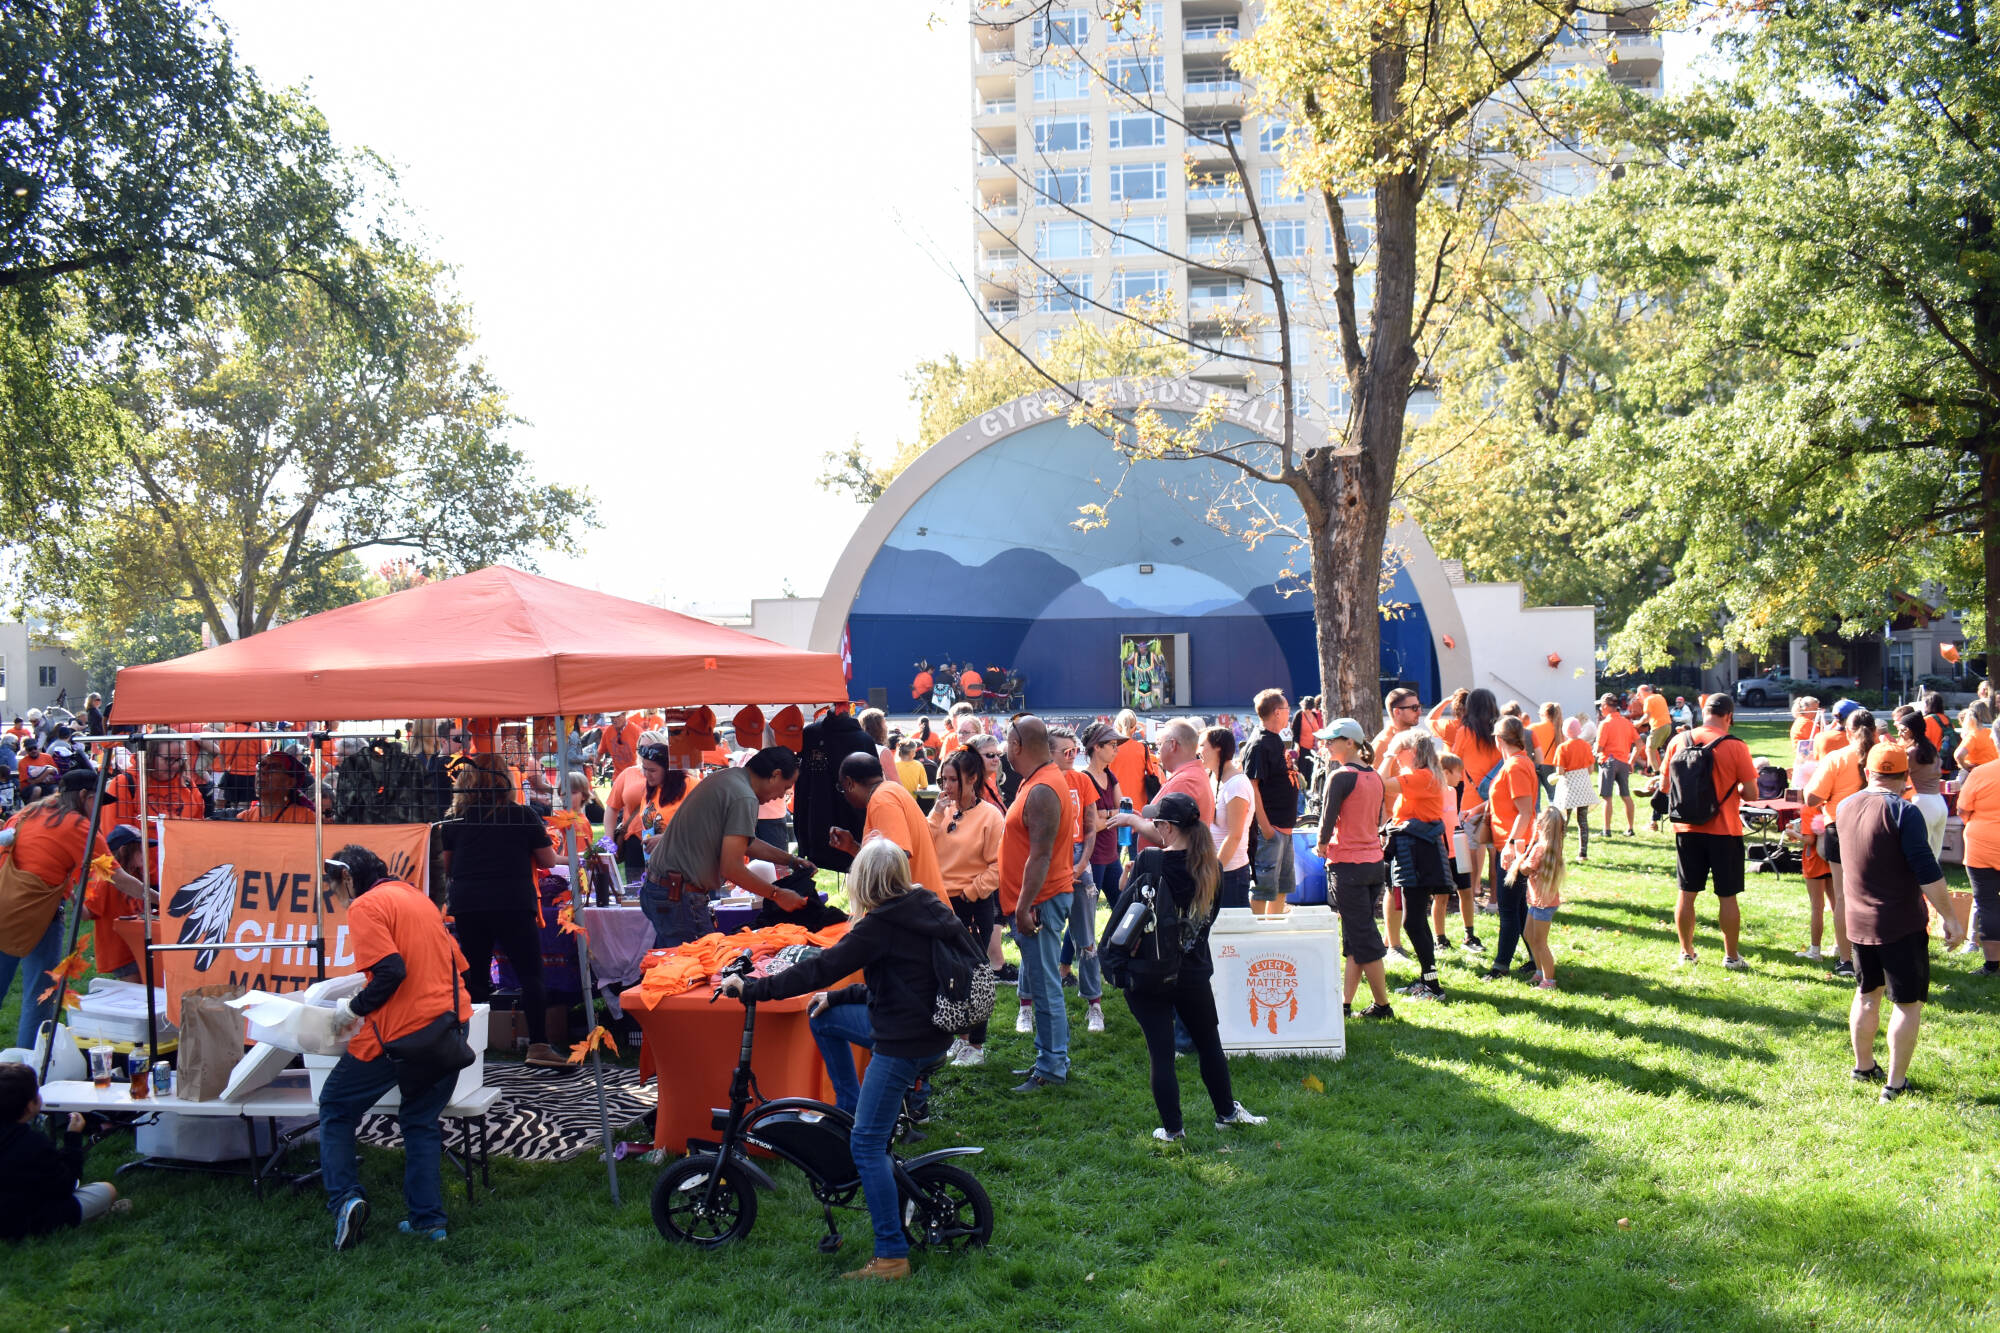 Hundreds came out in their orange shirts to the Celebration of Indigenous Culture and Resiliency in Penticton's Gyro Park on the second National Day of Truth and Reconciliation. (Brennan Phillips - Western News)